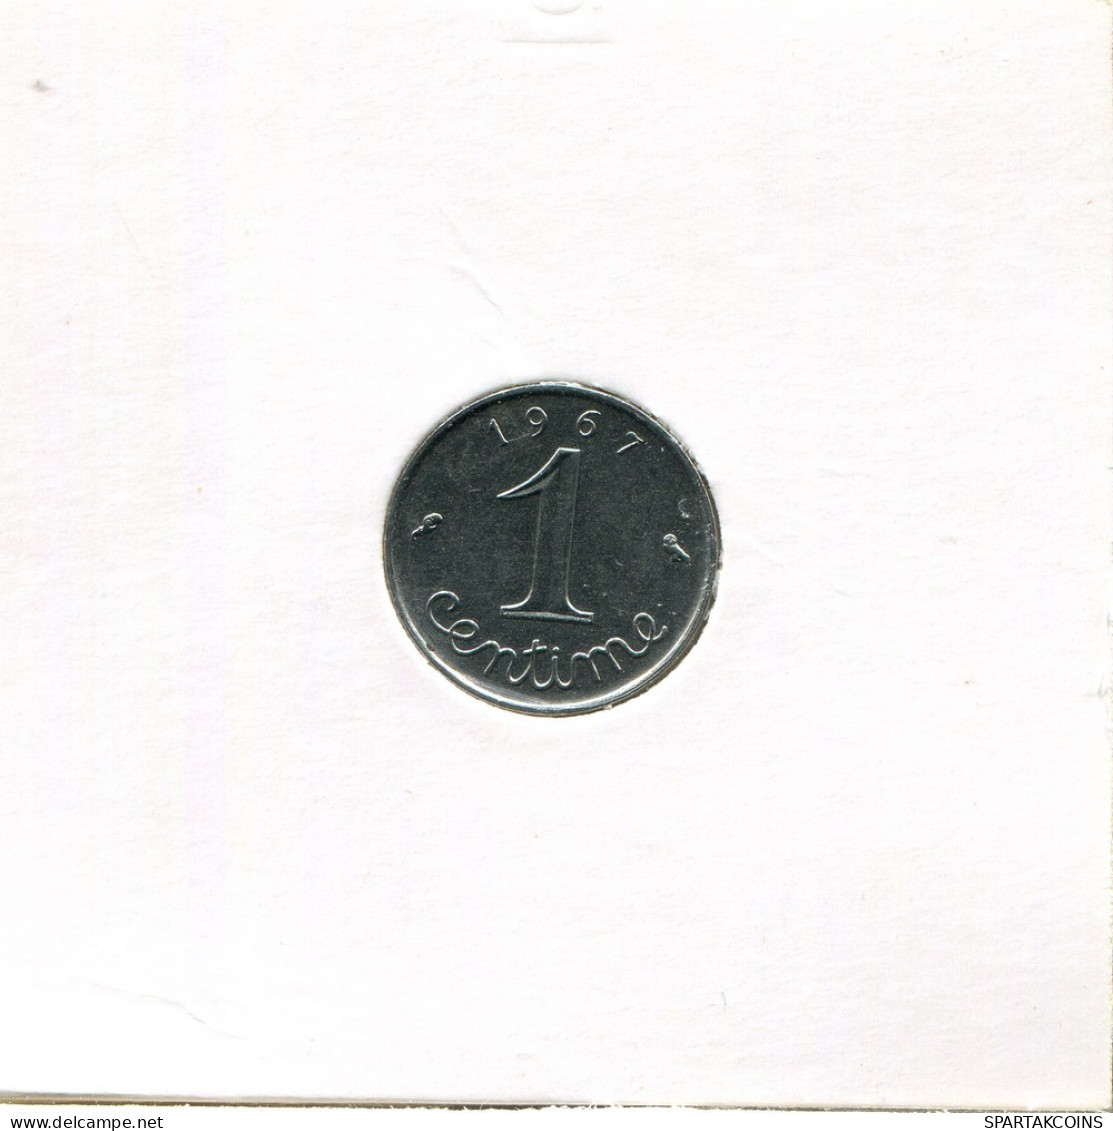 1 CENTIME 1967 FRANCE Coin French Coin #AK515 - 1 Centime